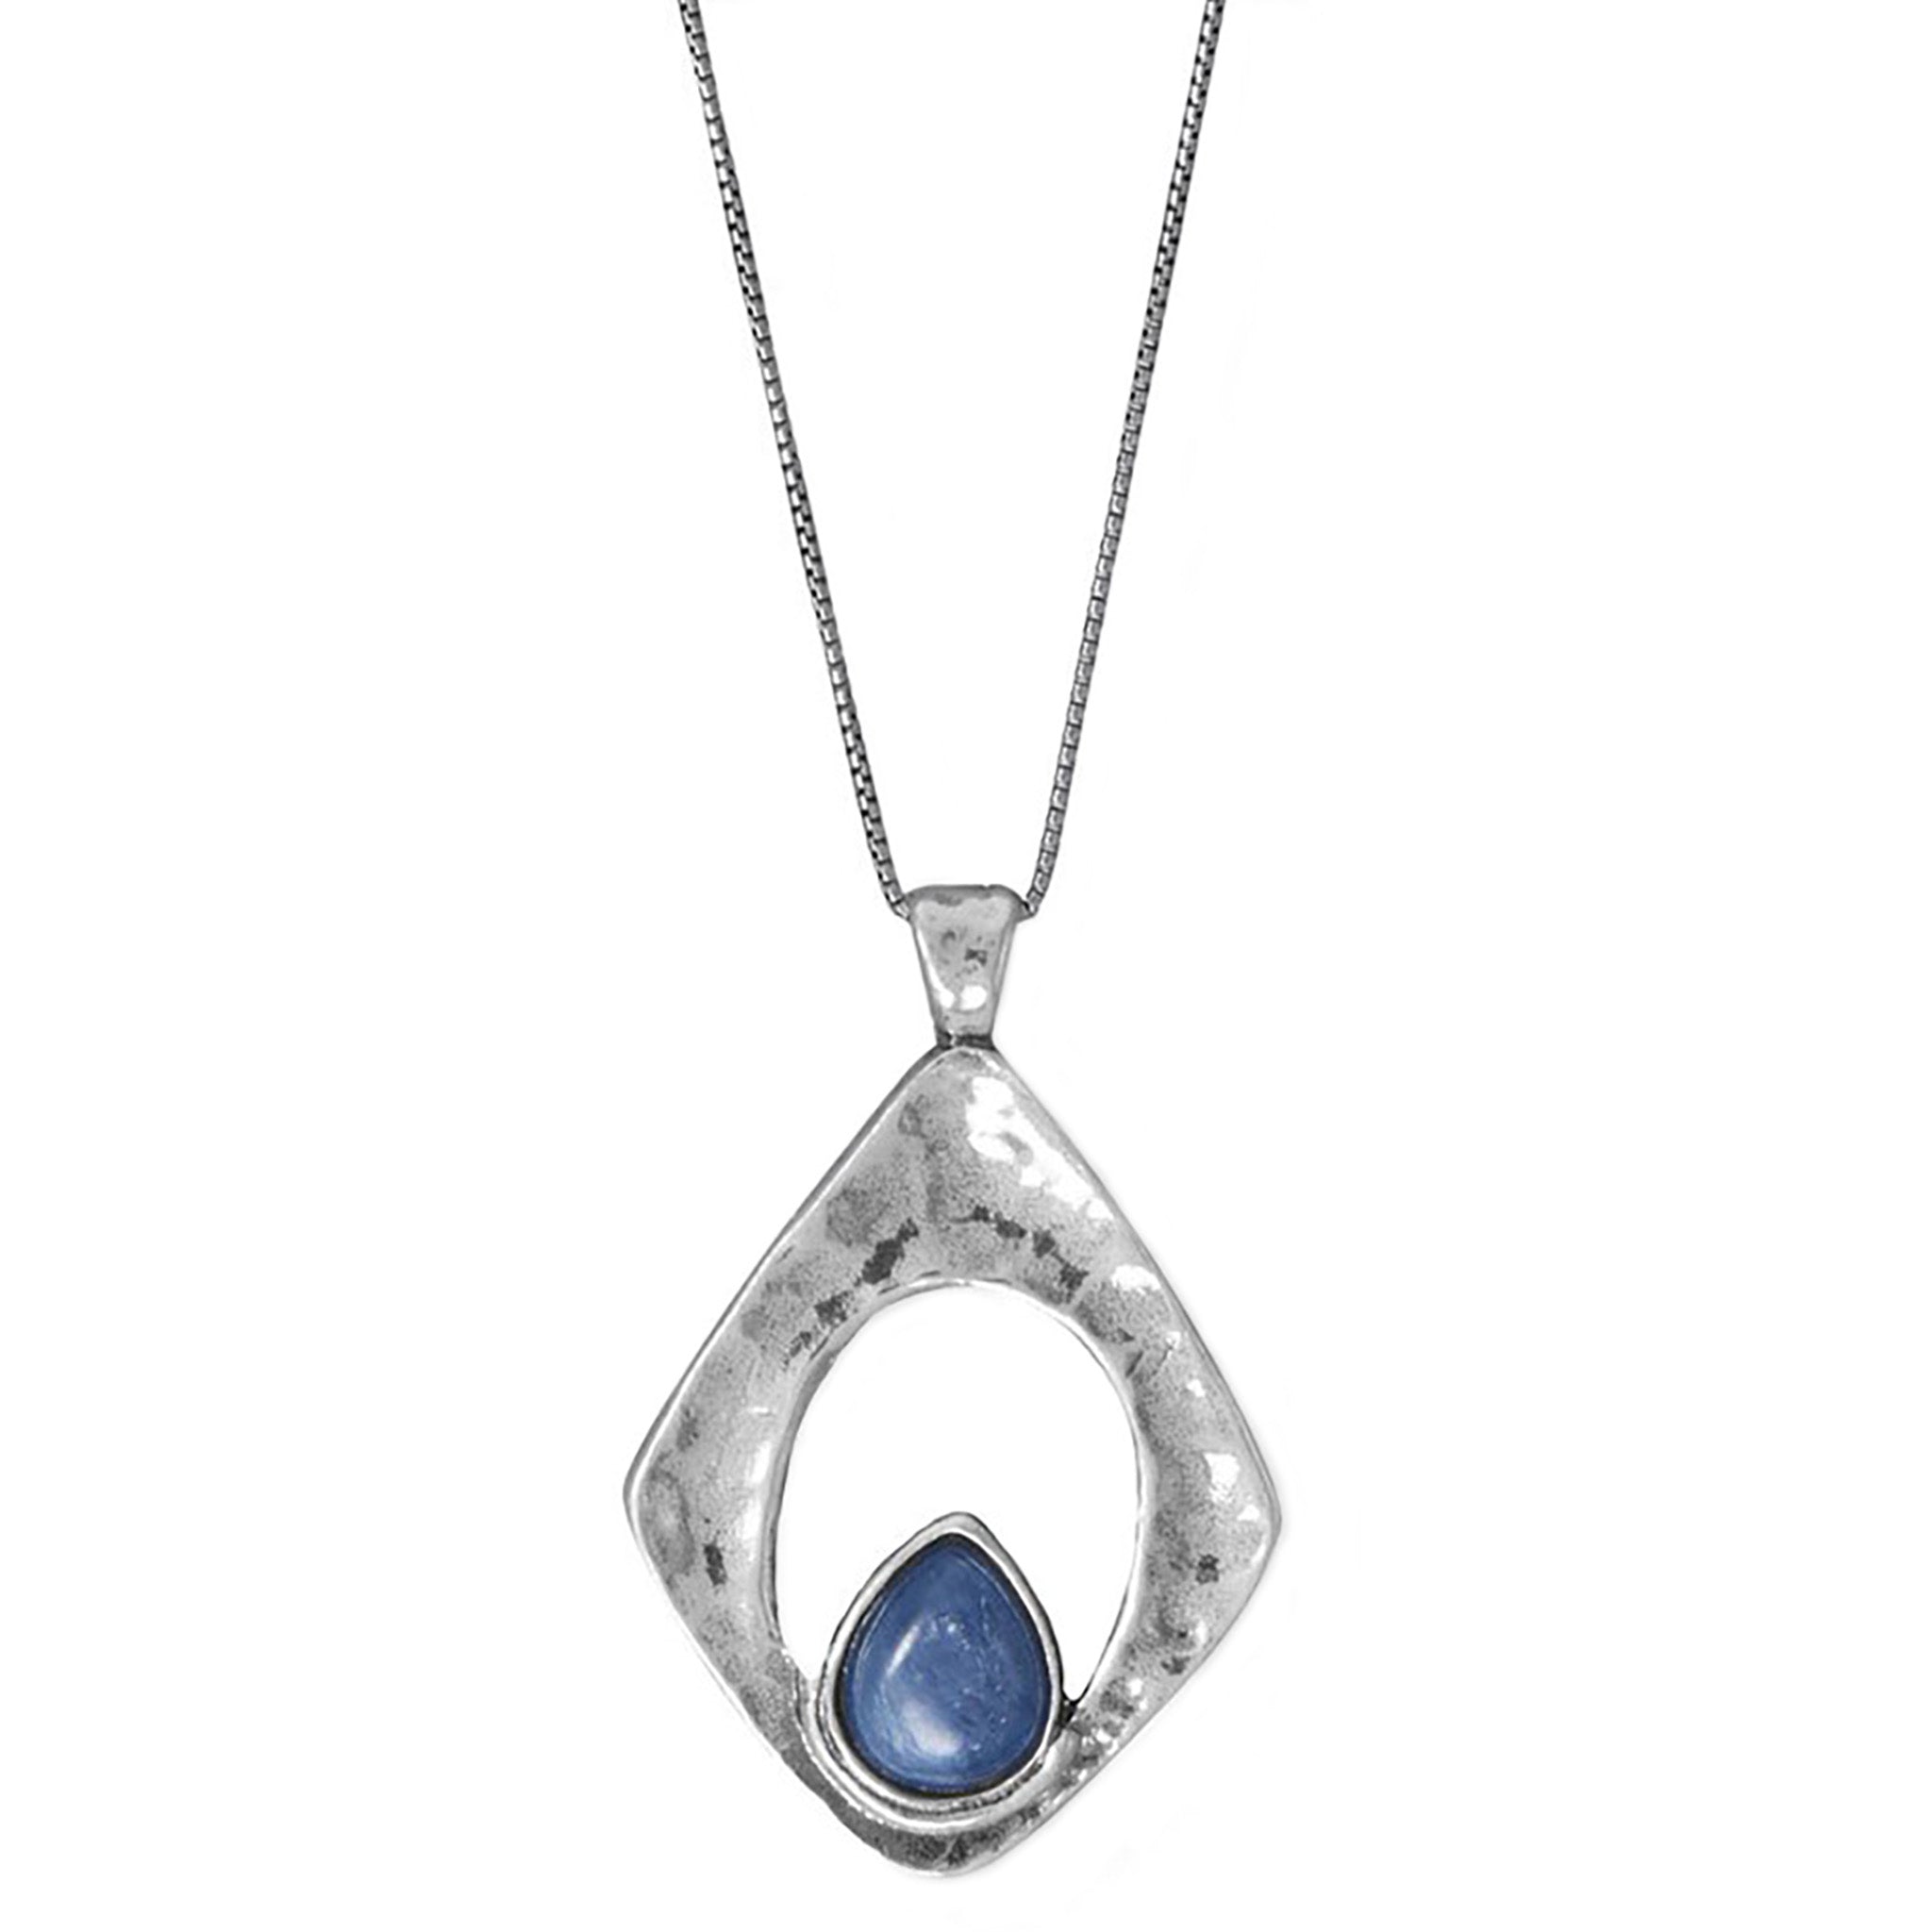 Hammered Silver Kyanite Pendant Necklace